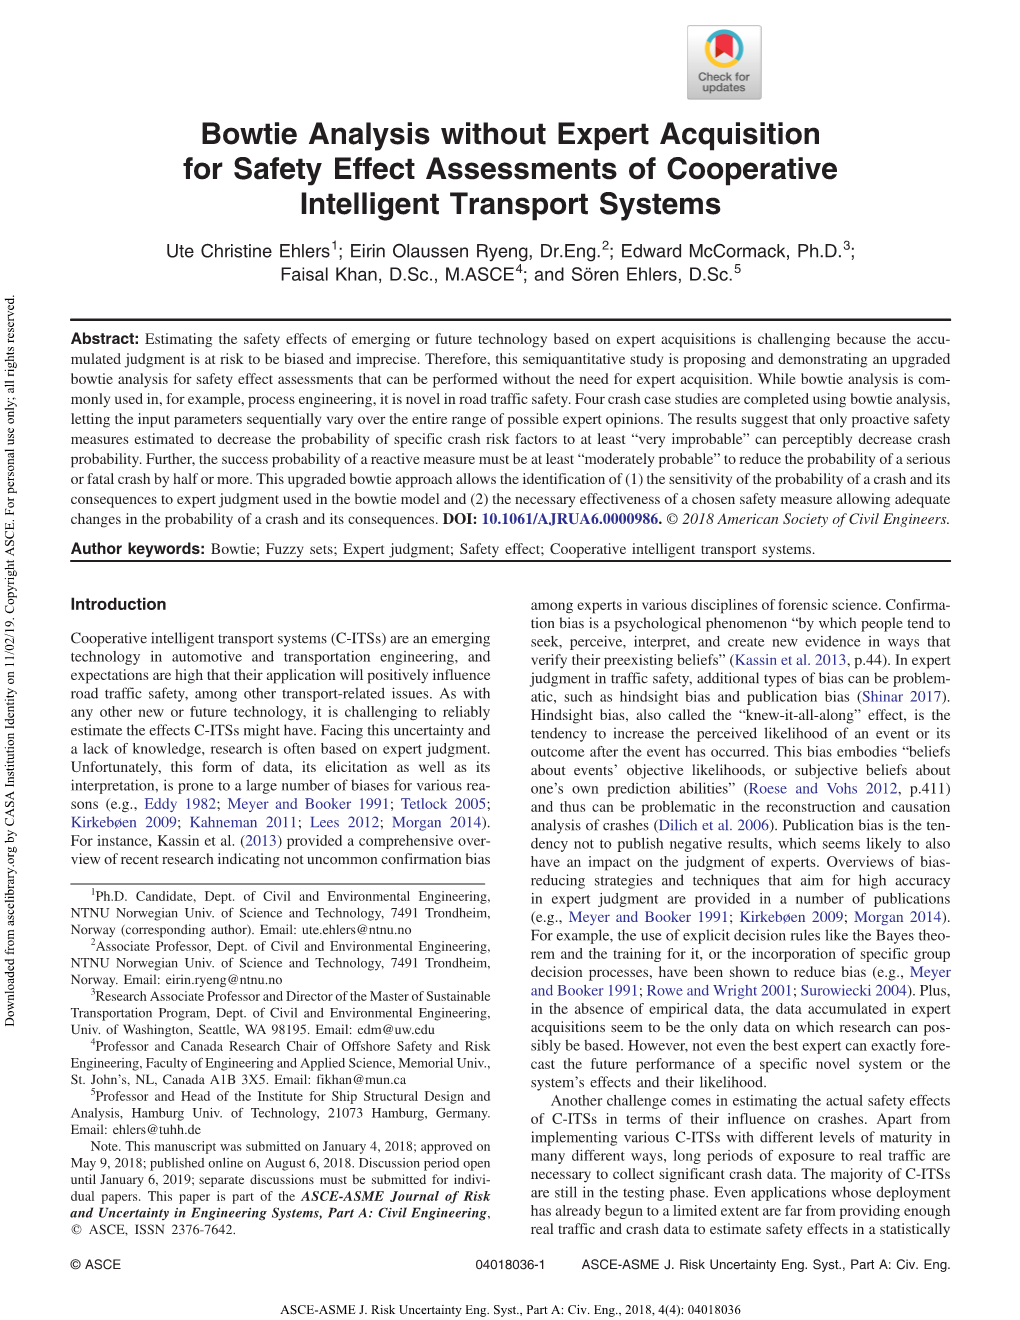 Bowtie Analysis Without Expert Acquisition for Safety Effect Assessments of Cooperative Intelligent Transport Systems